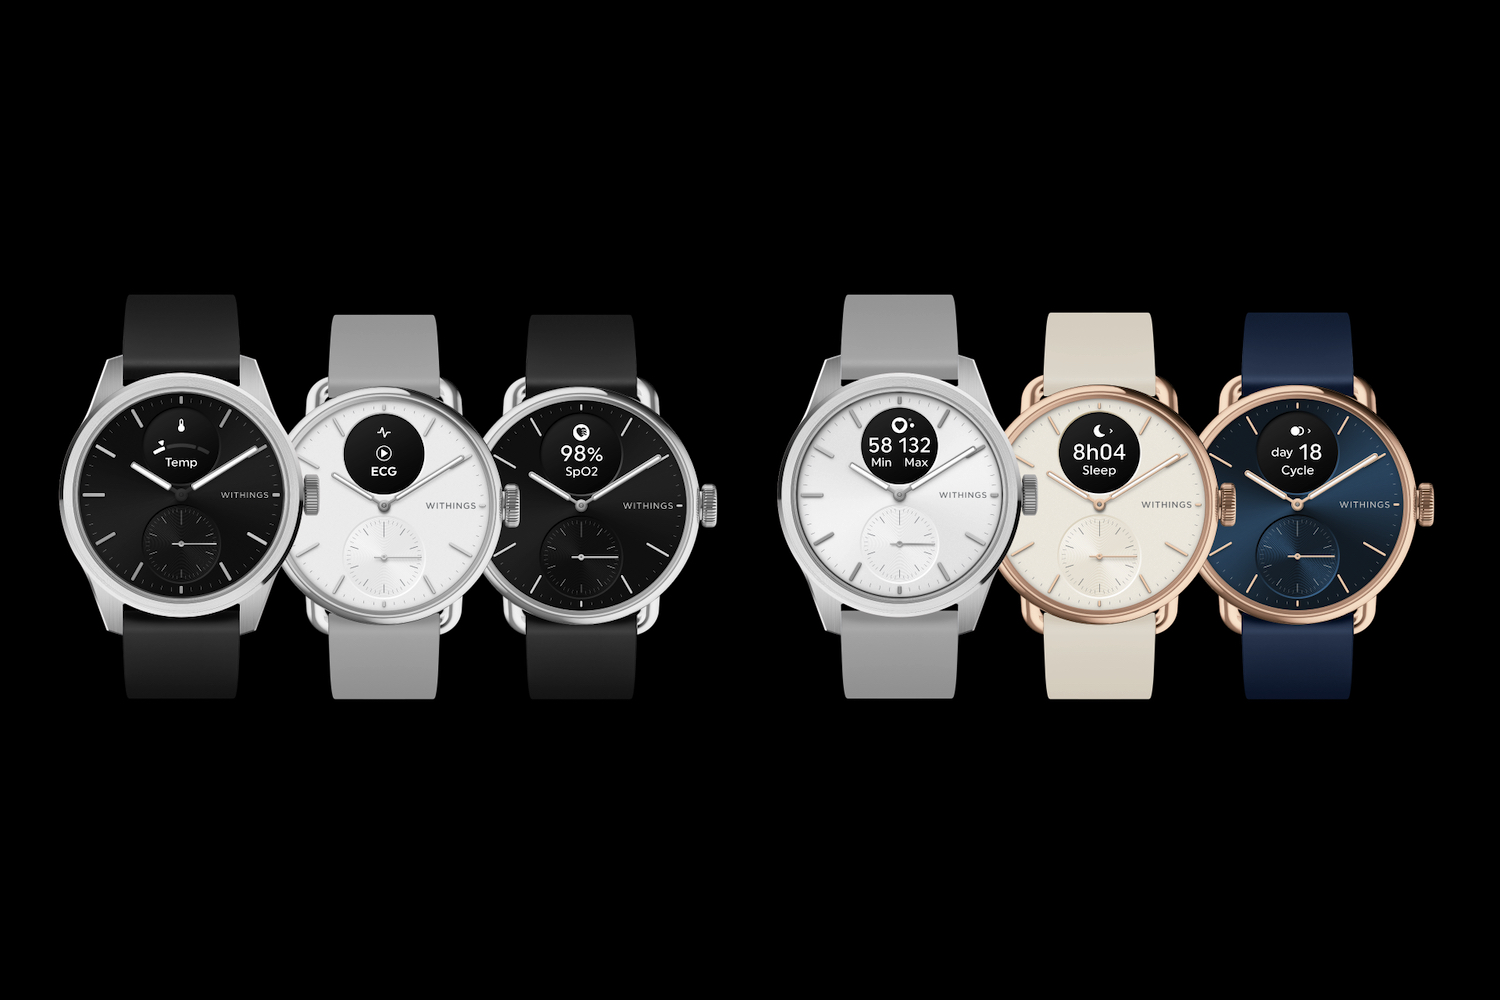 The range of Withings ScanWatch 2 smartwatches.